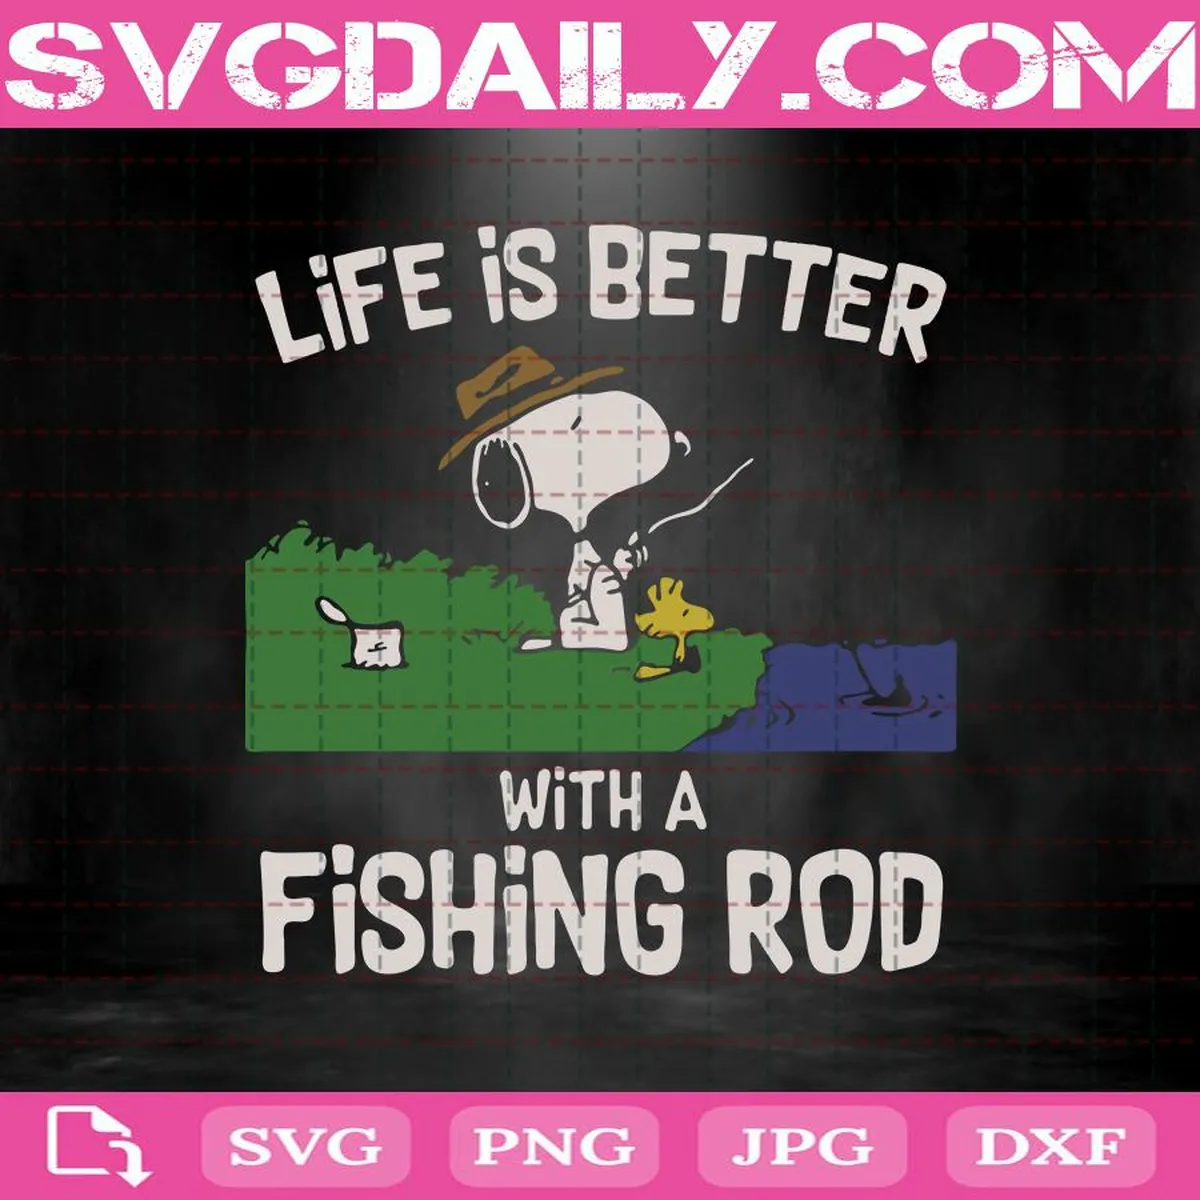 Life Is Better With A Fishing Rod Svg, Snoopy Fishing Svg, Fishing Svg, Snoopy Life Svg, Snoopy Svg, Snoopy Lovers Svg, Fishing Lovers Svg